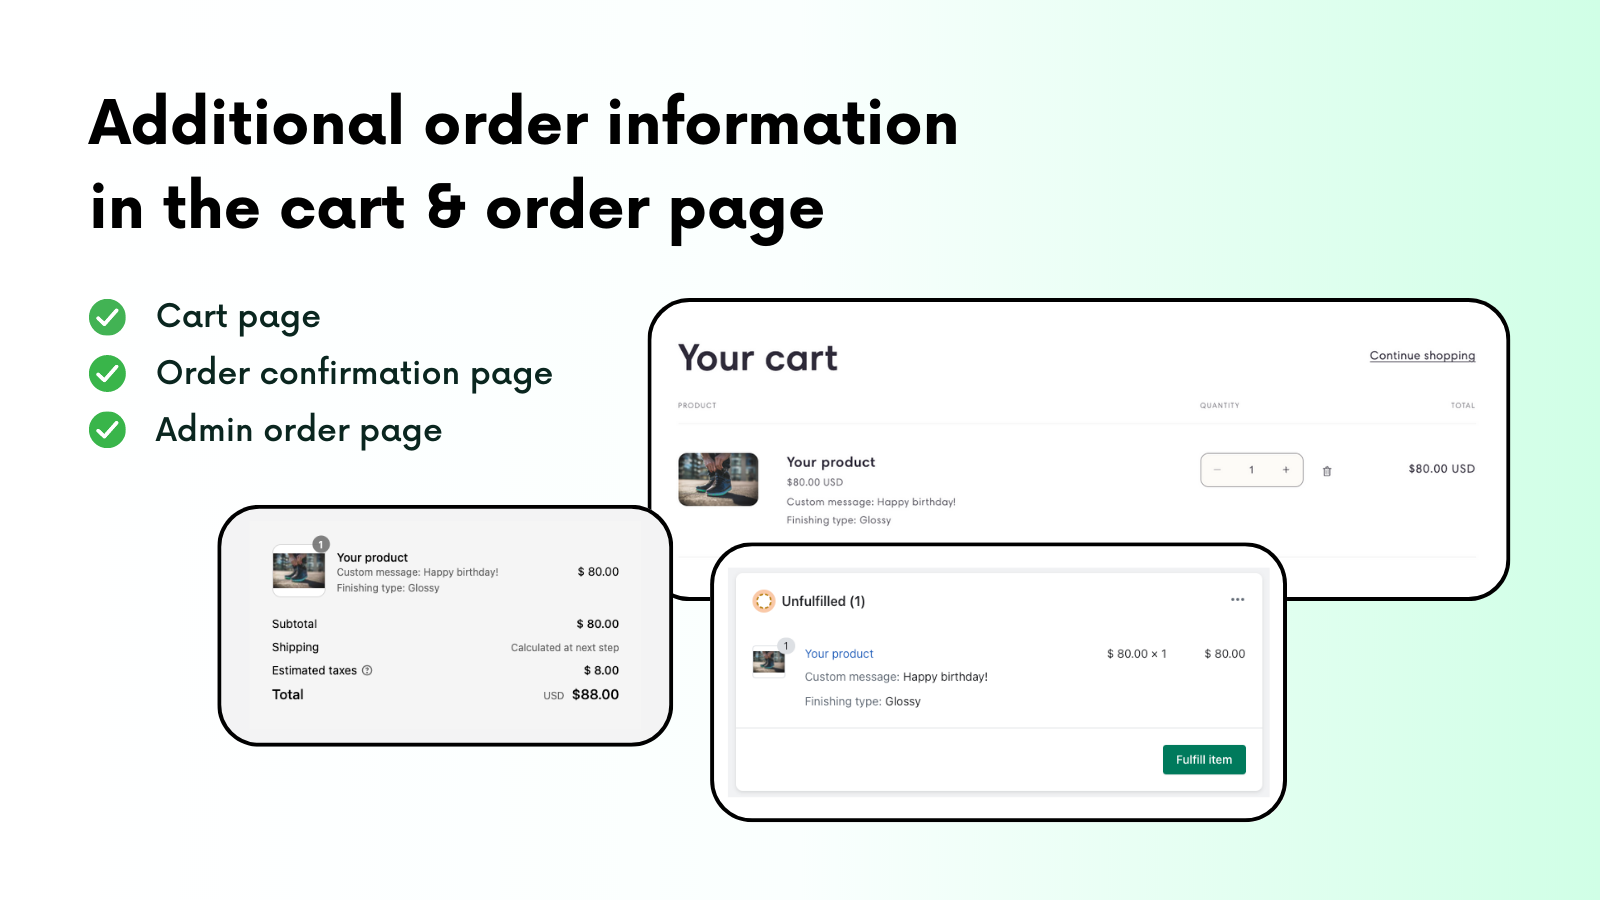 Additional order information is displayed in important pages